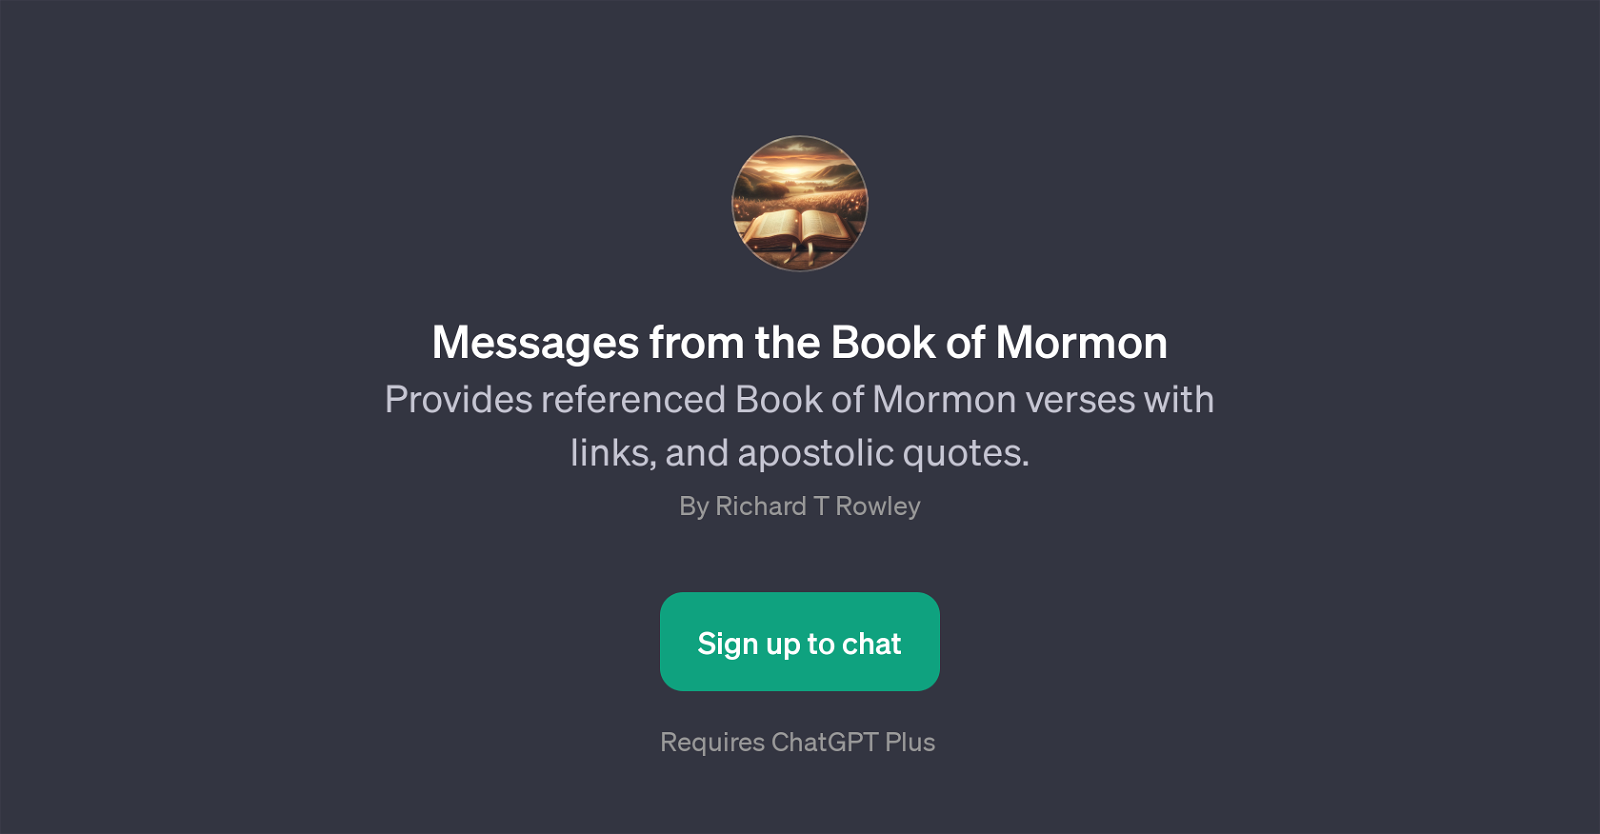 Messages from the Book of Mormon website